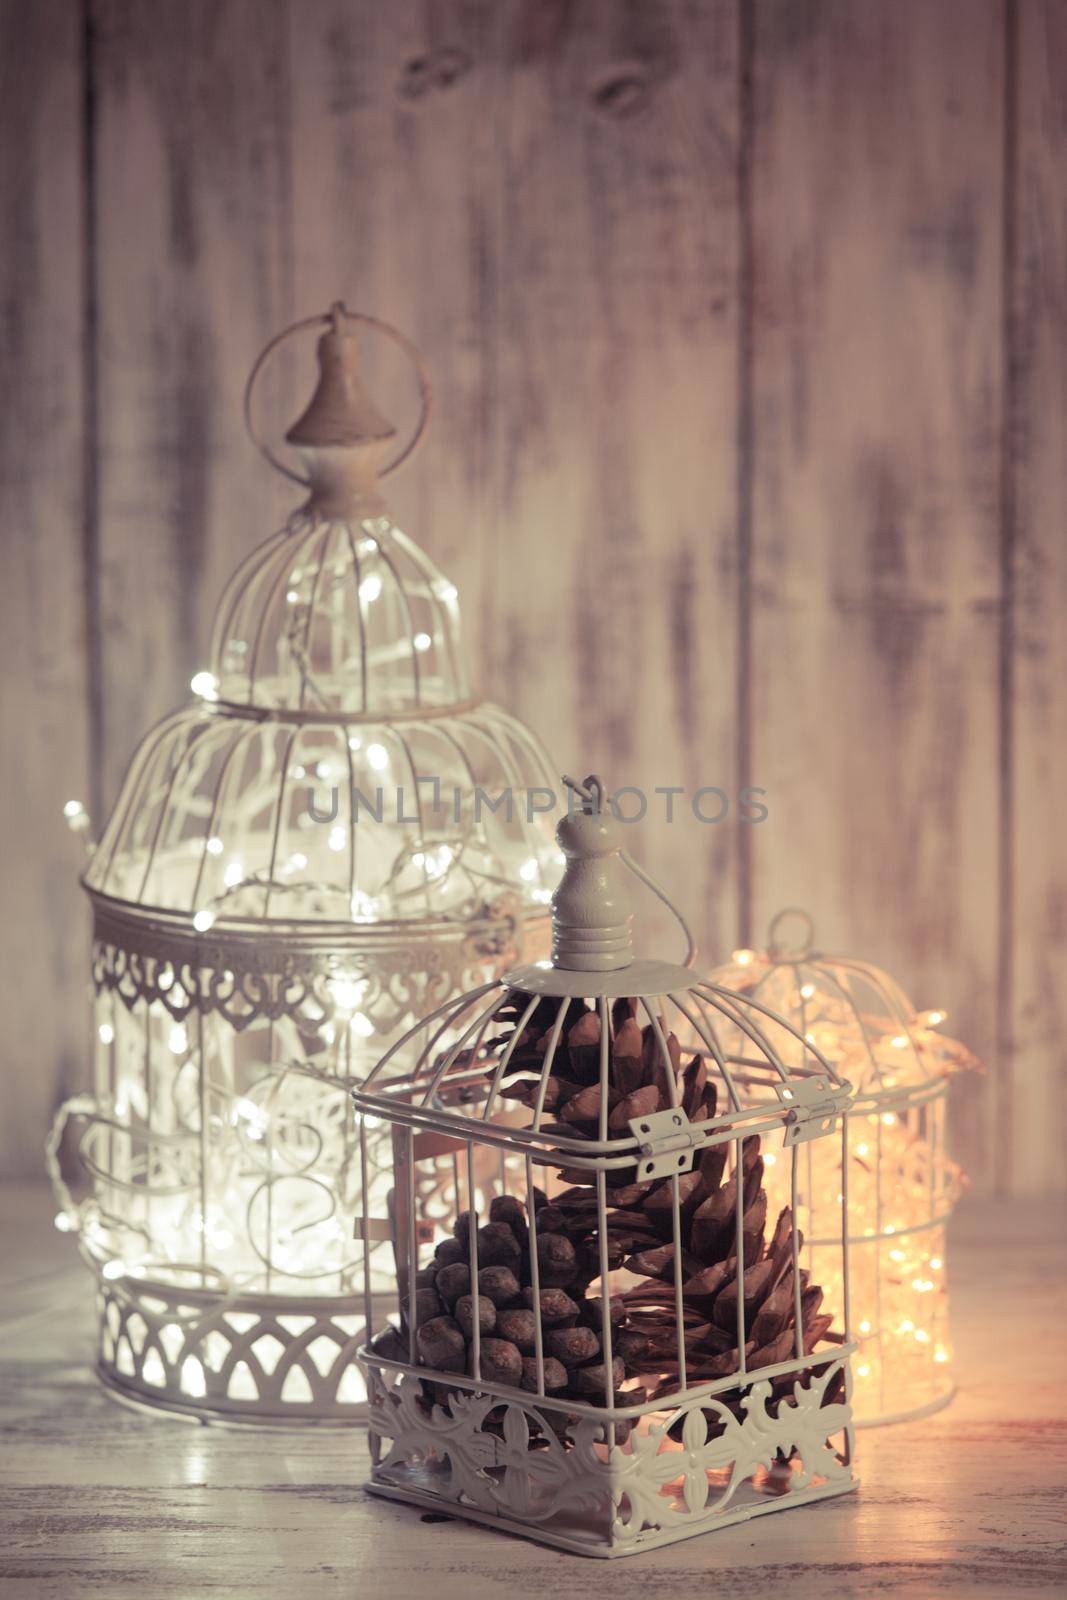 Christmas light in a cage by oksix